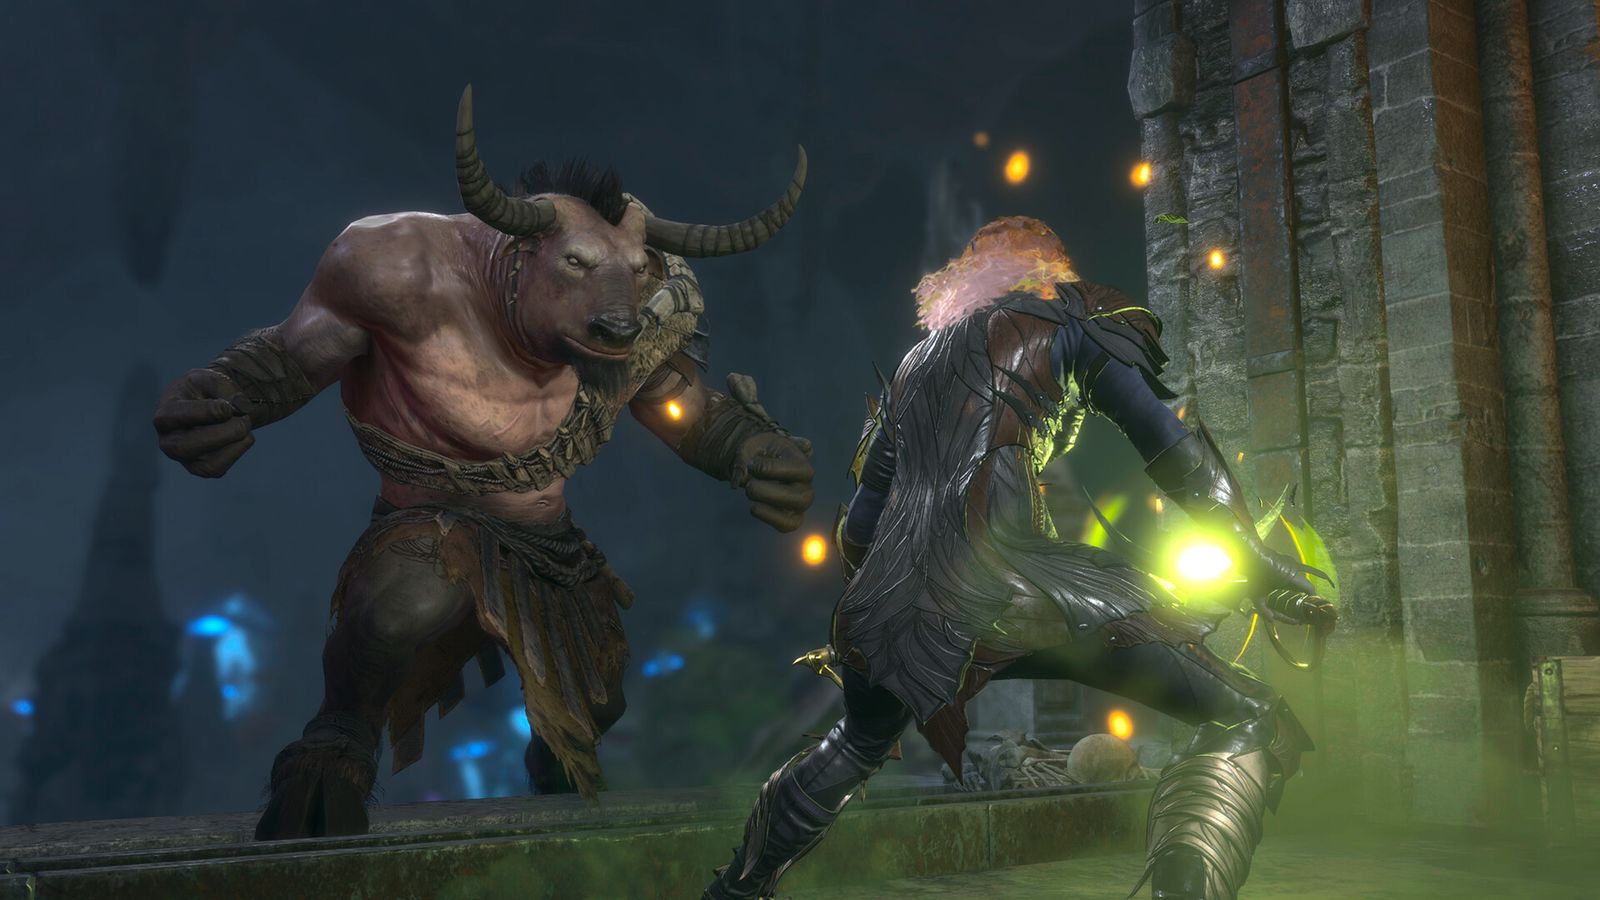 A Baldur's Gate 3 character engaged in combat with a minotaur